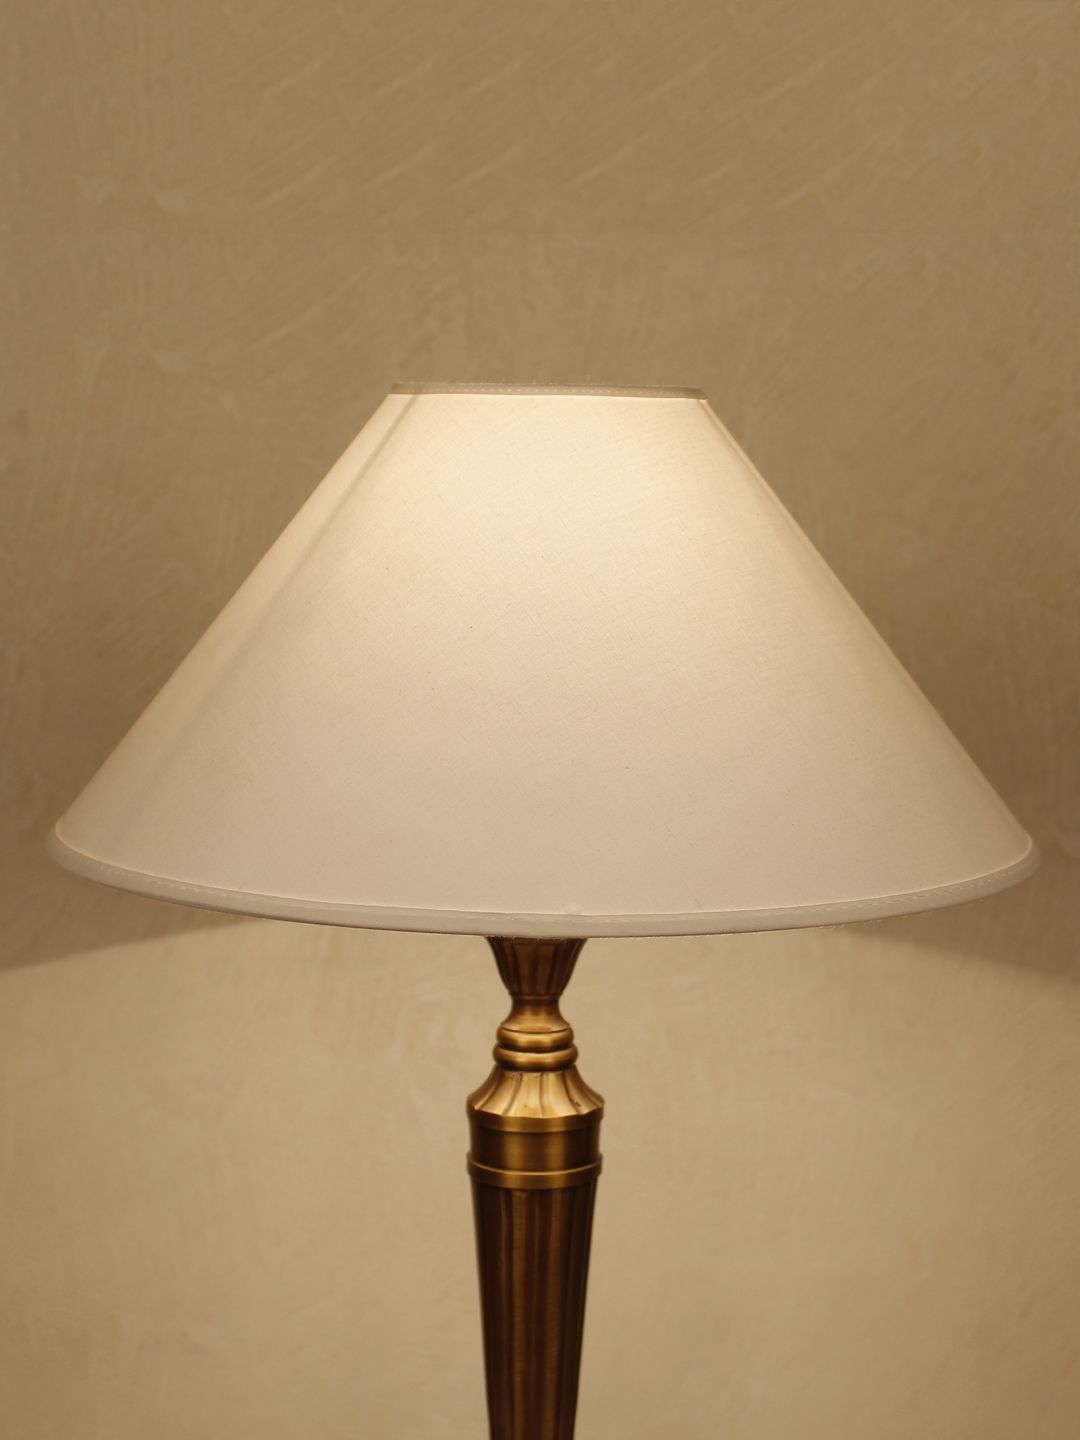 THE LIGHT STORE White Table Top Lamp Shade Price in India